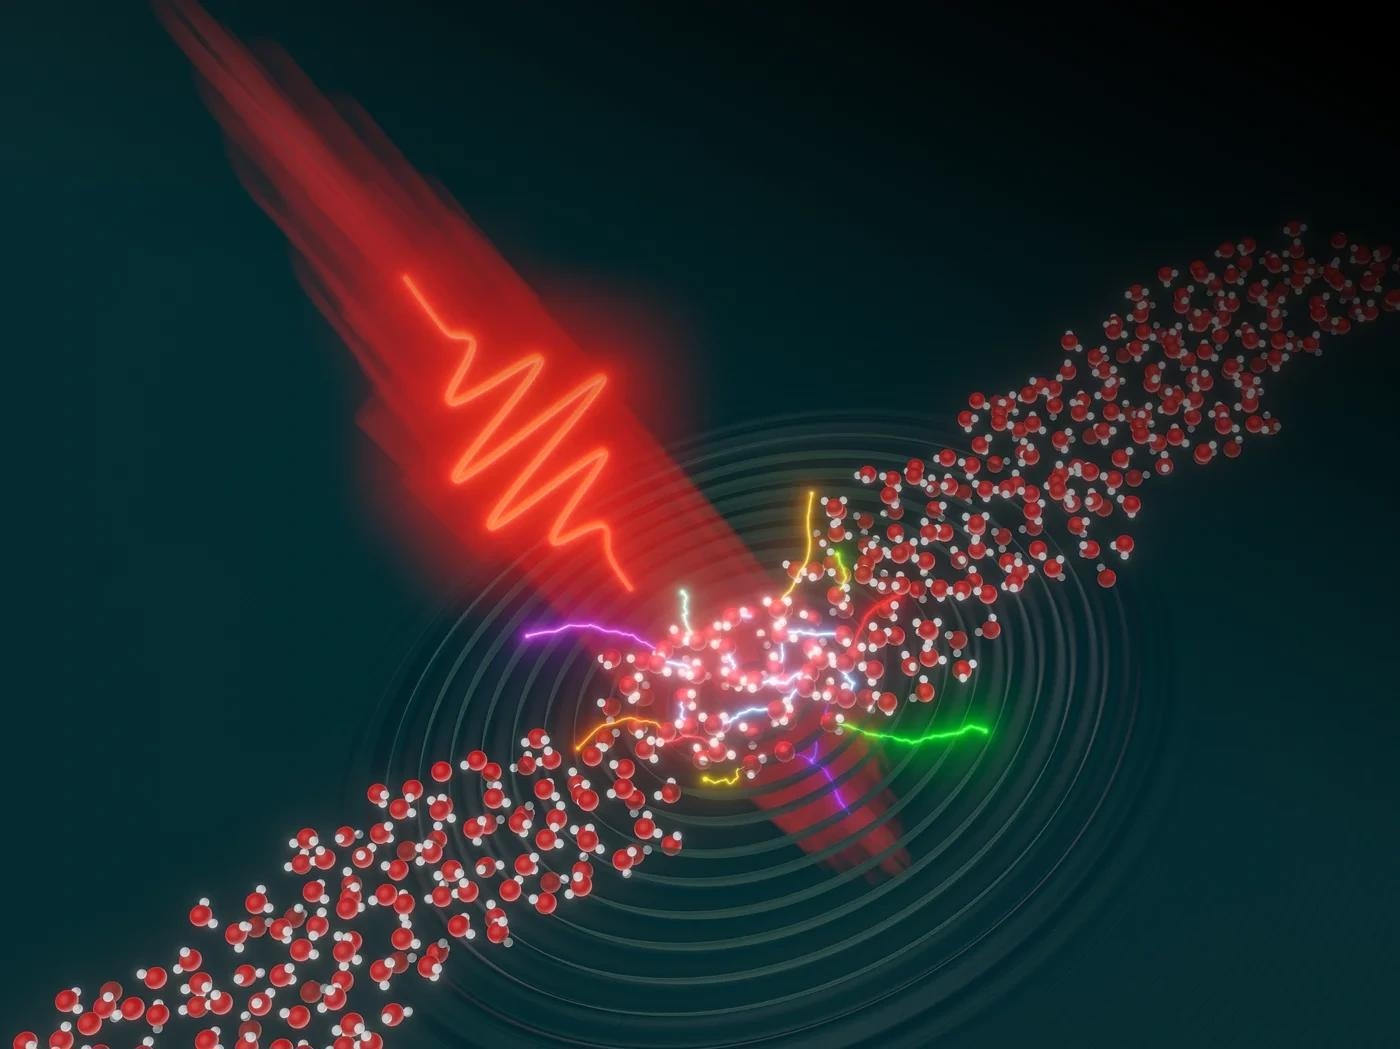 New Technique Probes Electron Dynamics in Liquids Using Intense Lasers